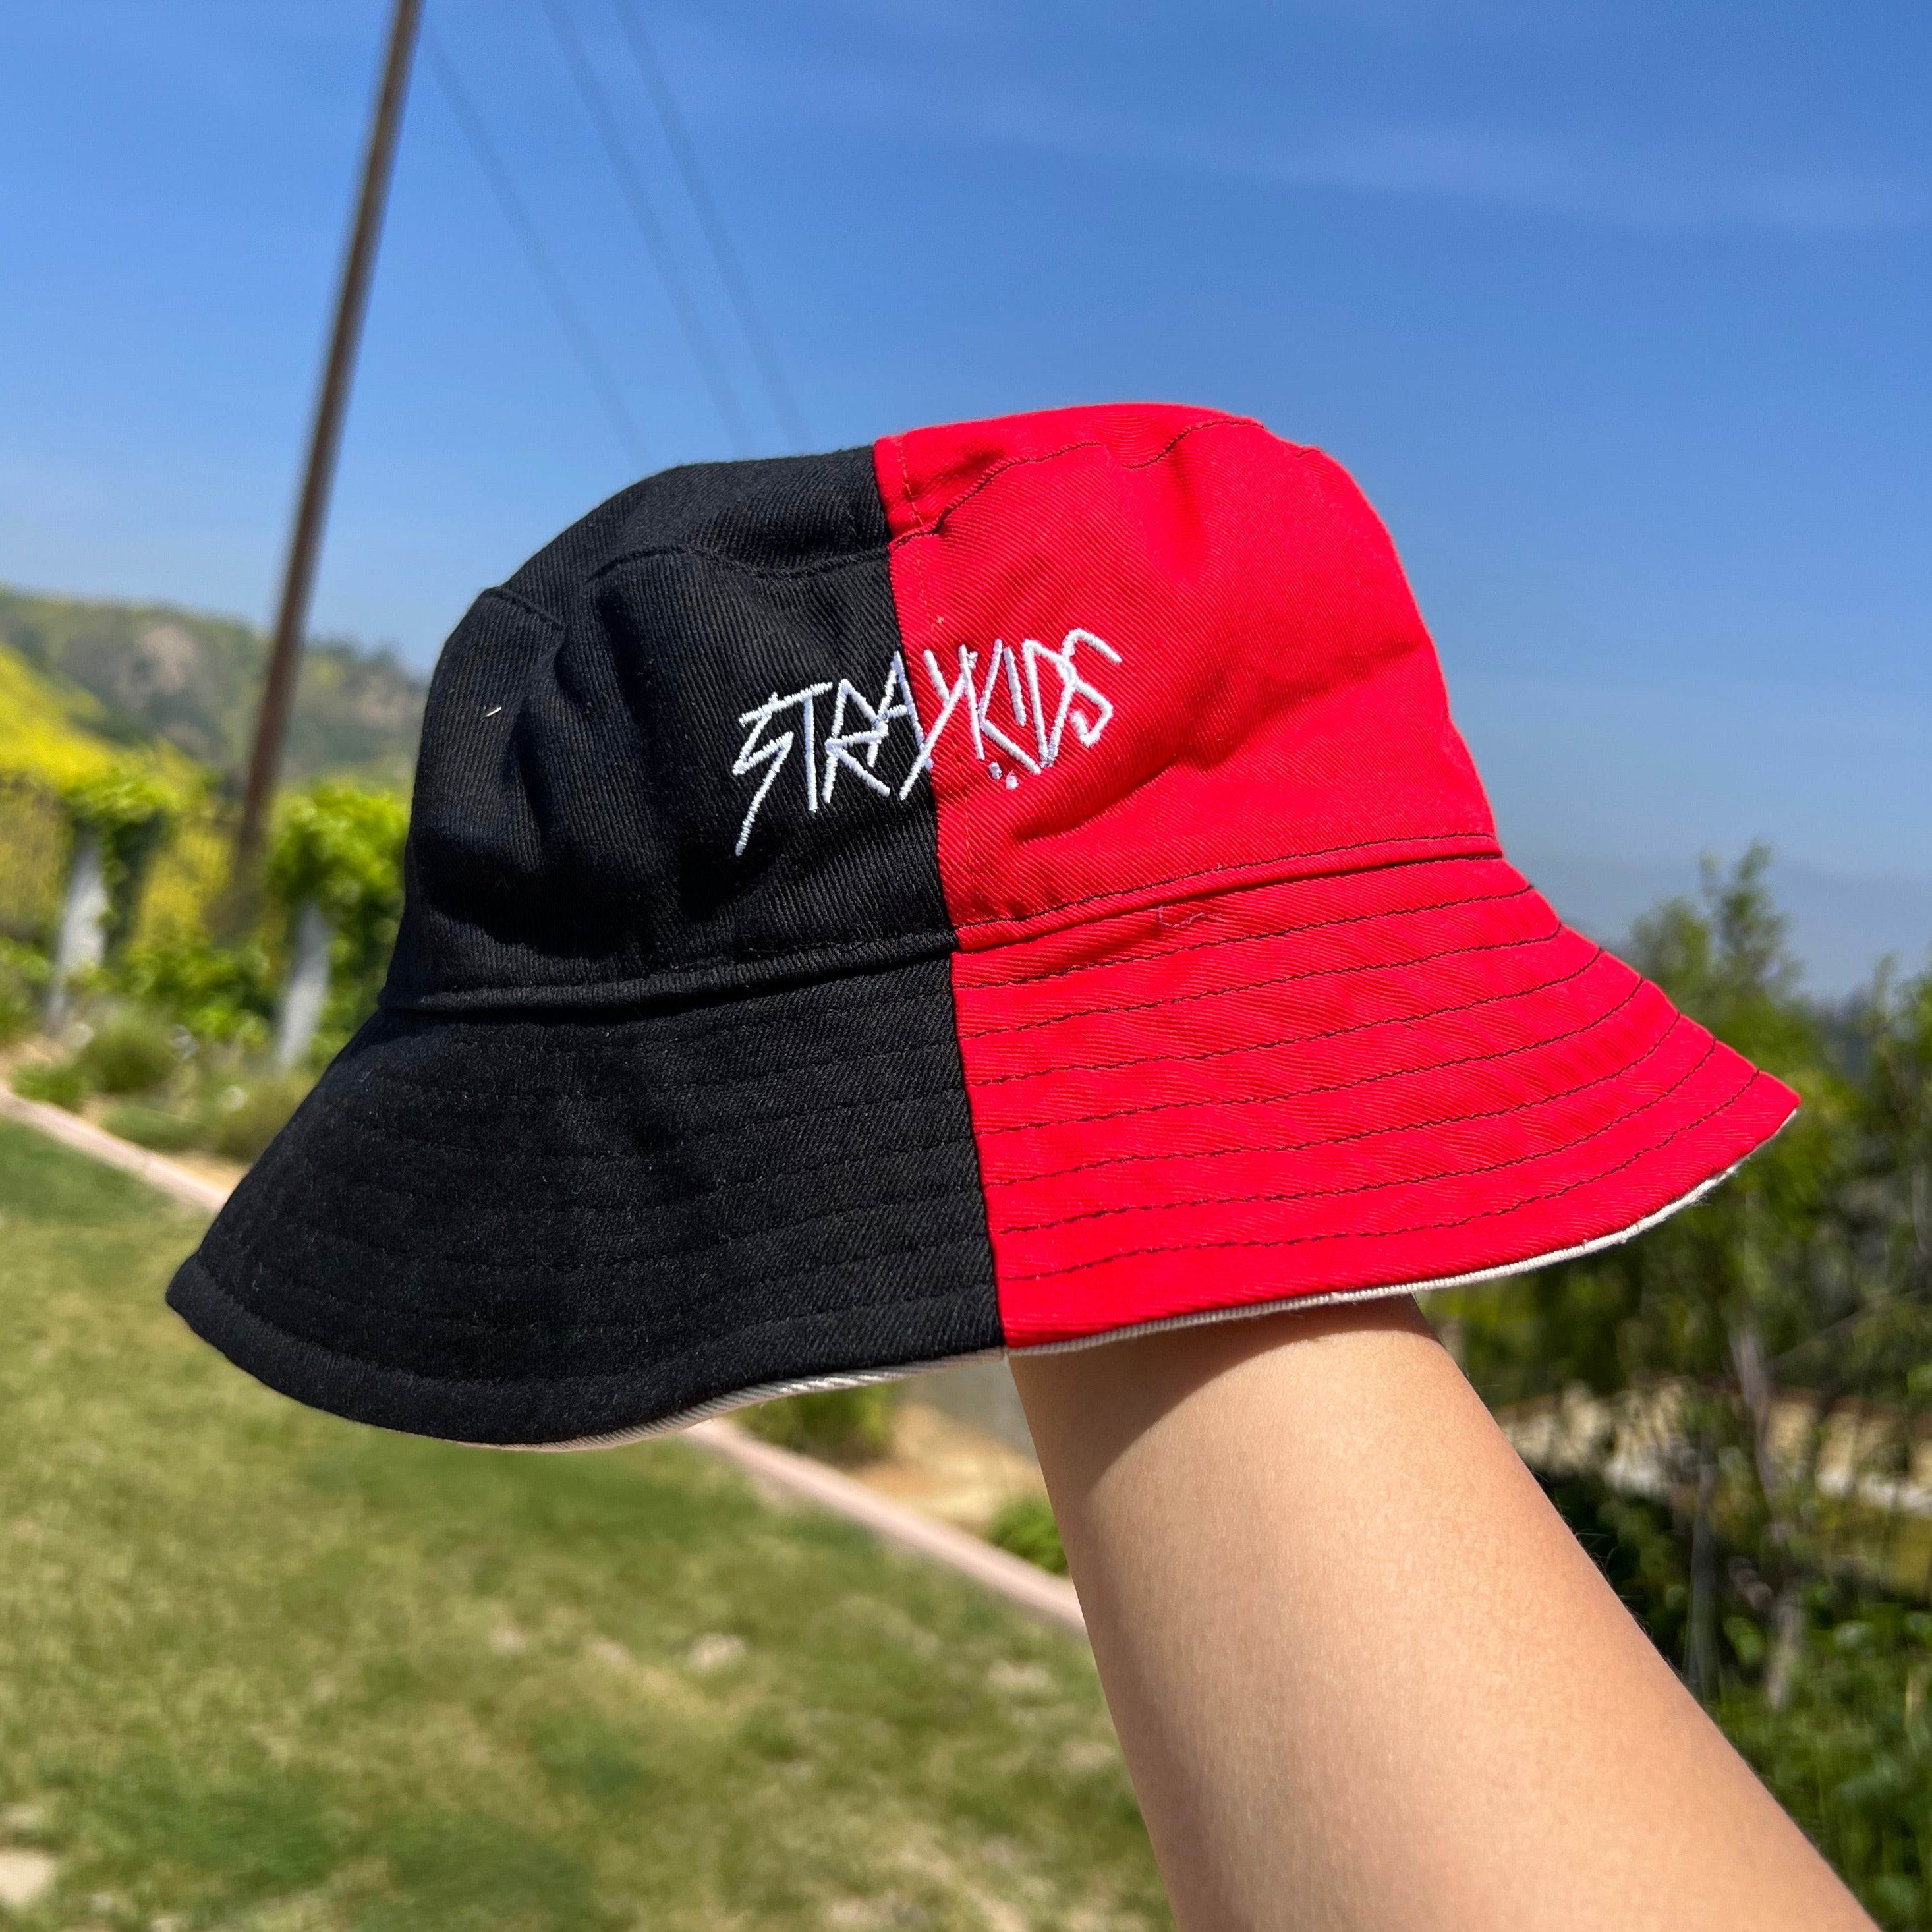 NEW] Stray Kids Bucket Hat – Forever Seesaw